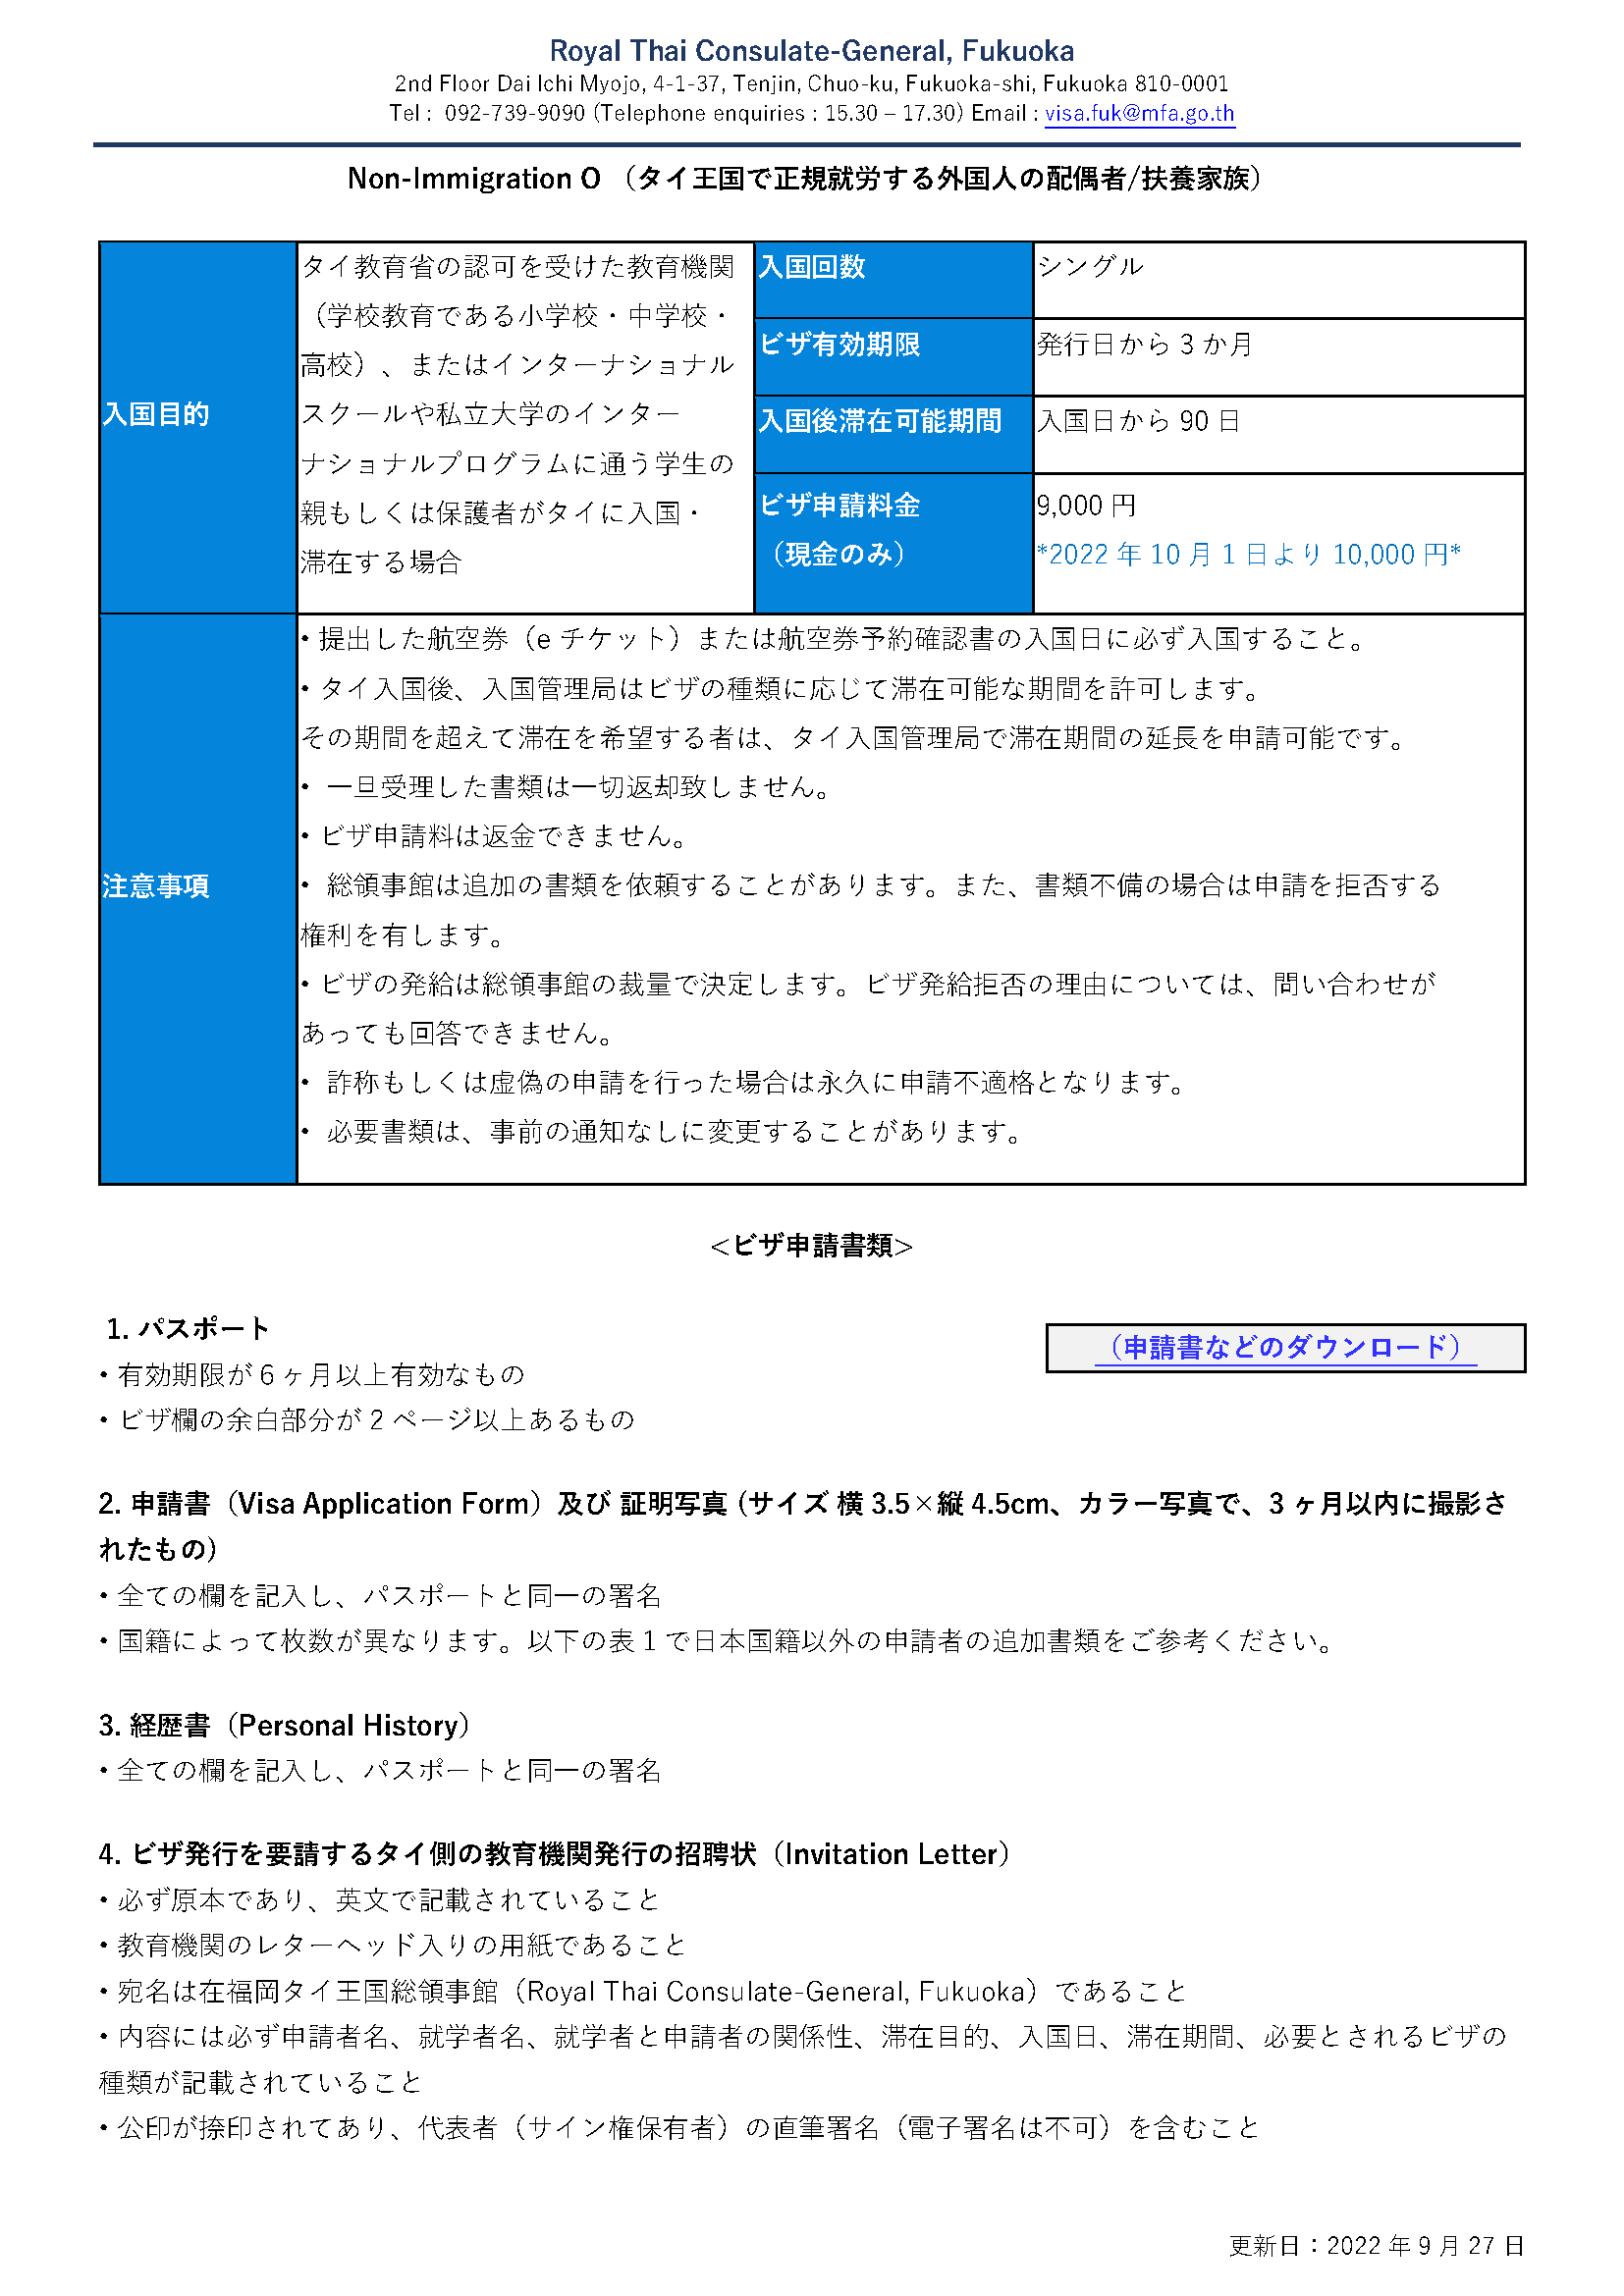 6._JP_Non-Immigrant_O_(Parent_or_Guardiand_of_Student)_Page_1